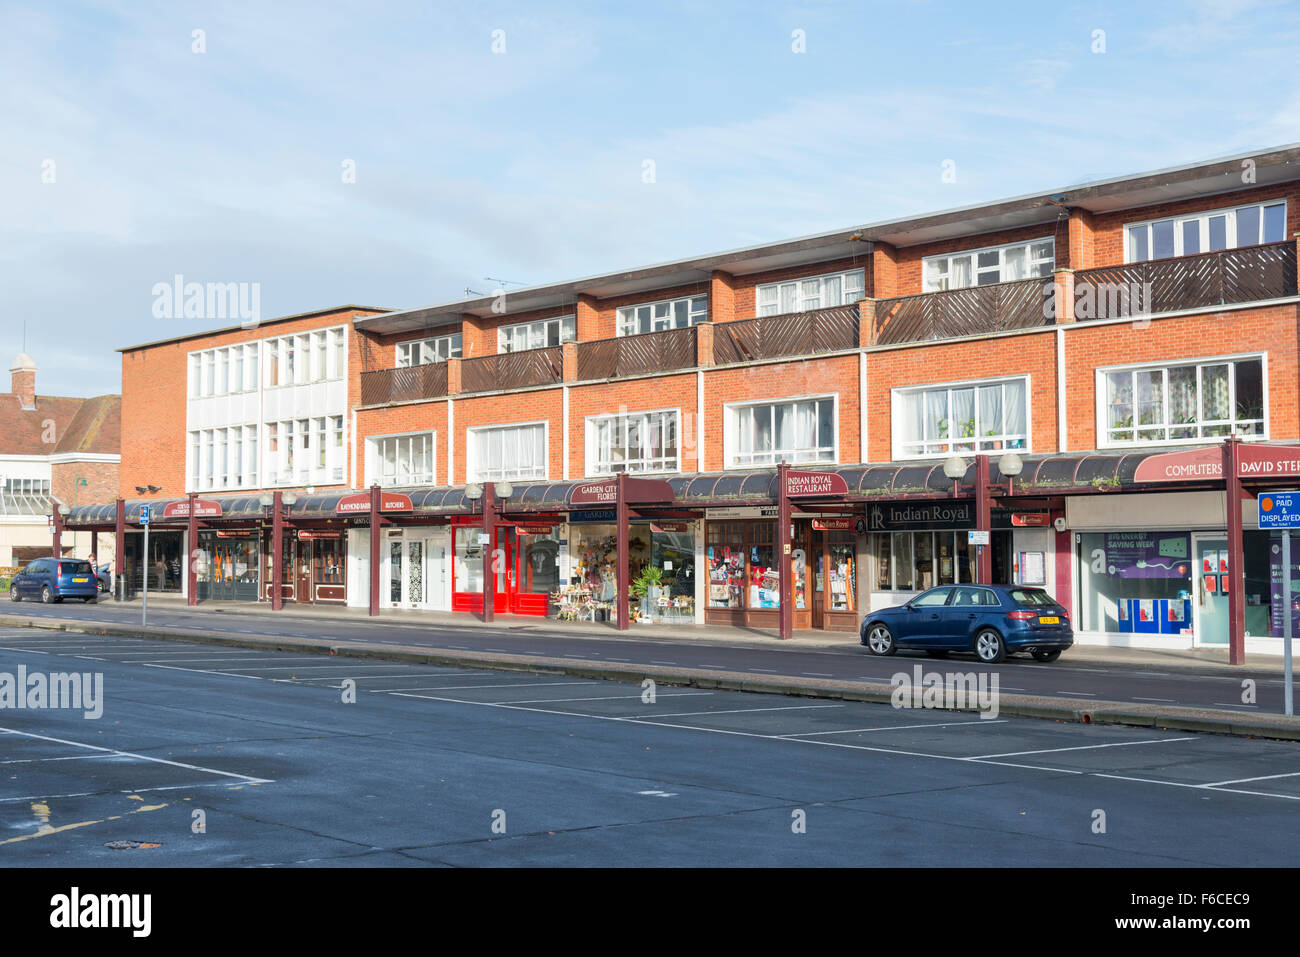 A row of shops and parking on a street in Letchworth Garden City showing ugly 1960's buildings and architecture Stock Photo